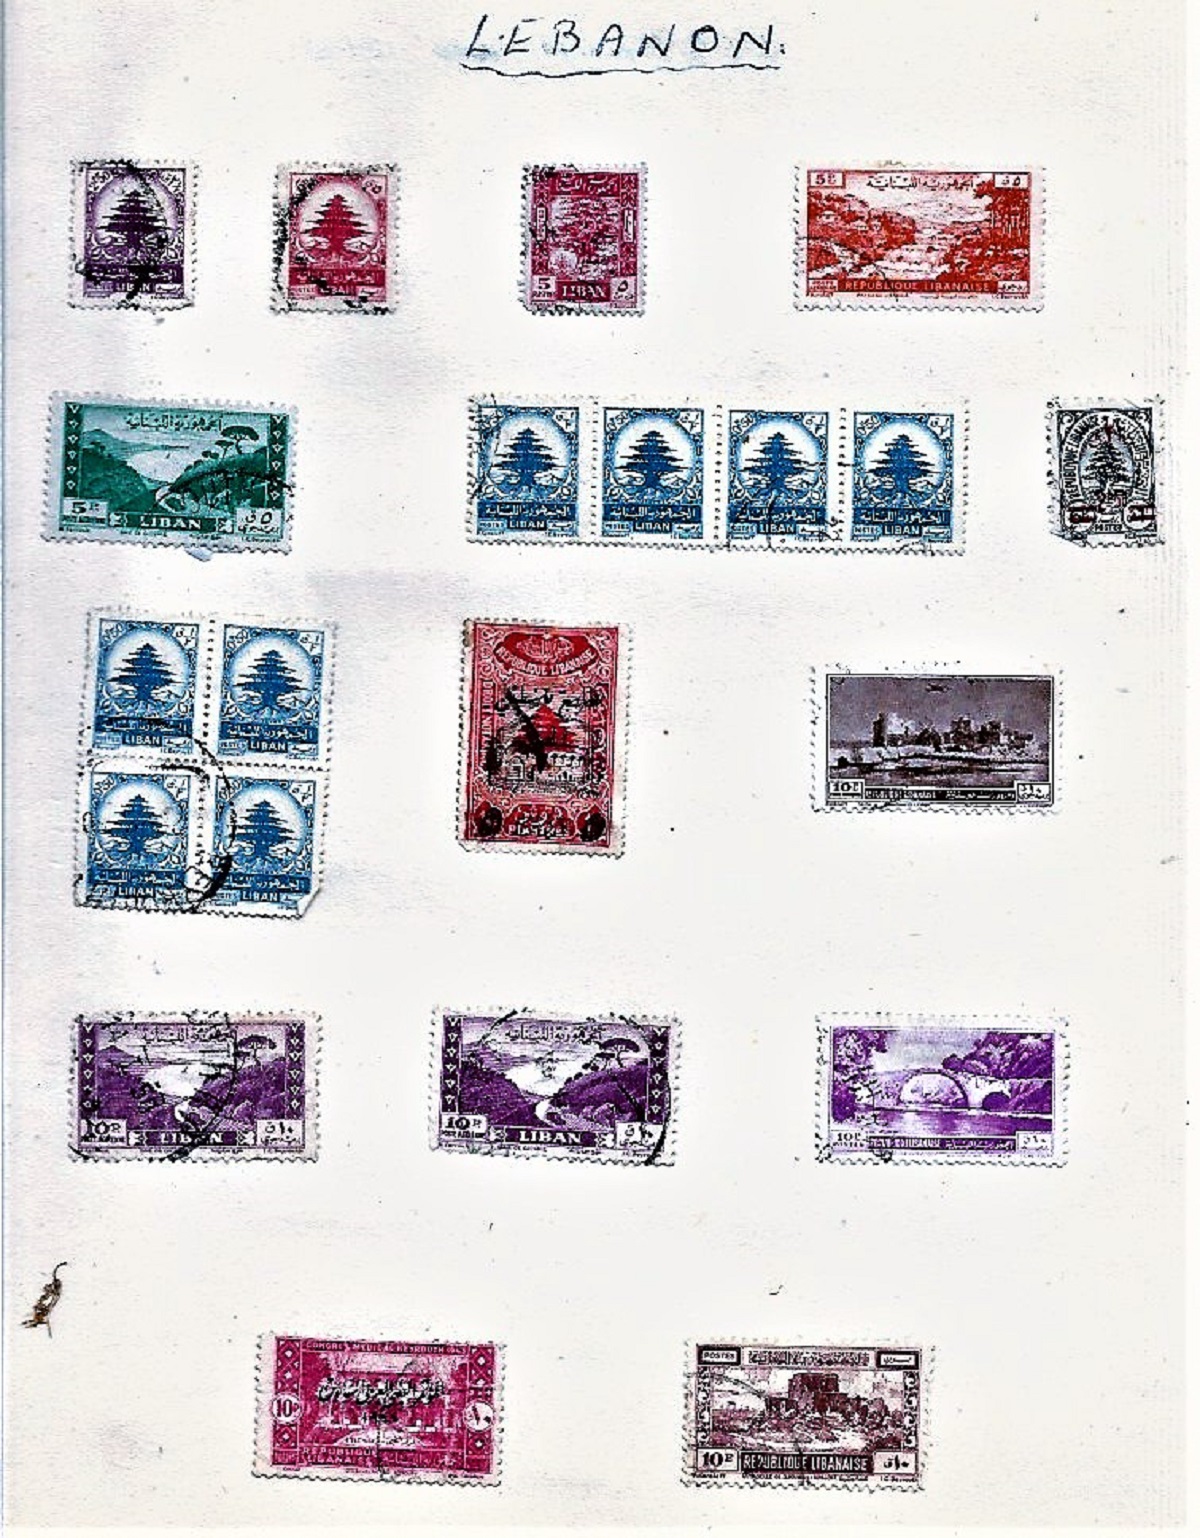 World stamp collection on 7 loose album pages. Includes Lebanon, Syria and more. Good condition. - Image 2 of 3